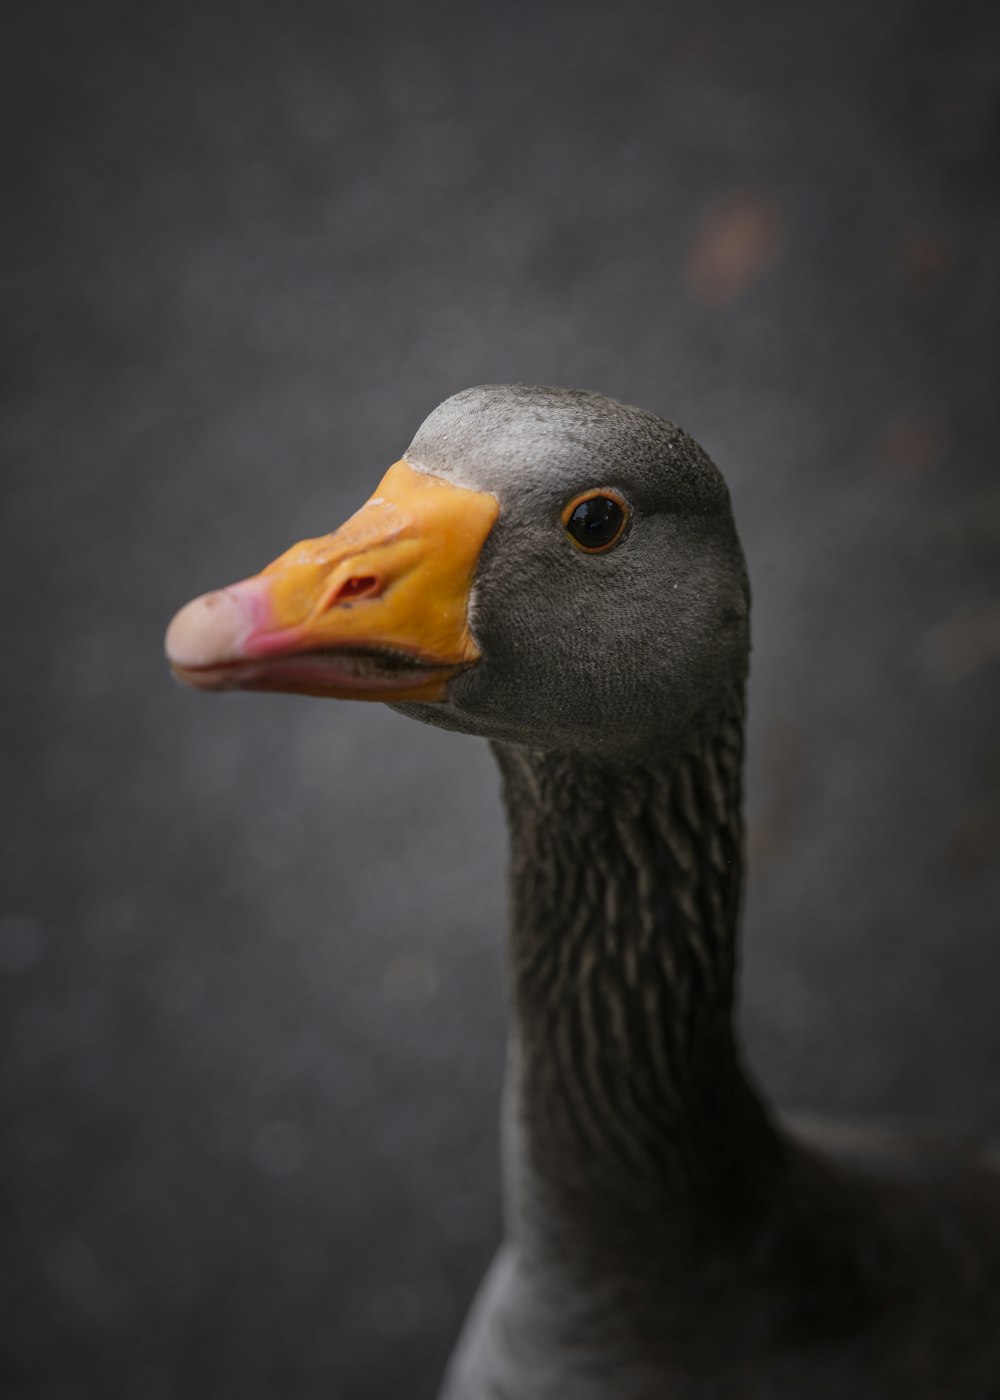 a close up of a duck with a yellow beak